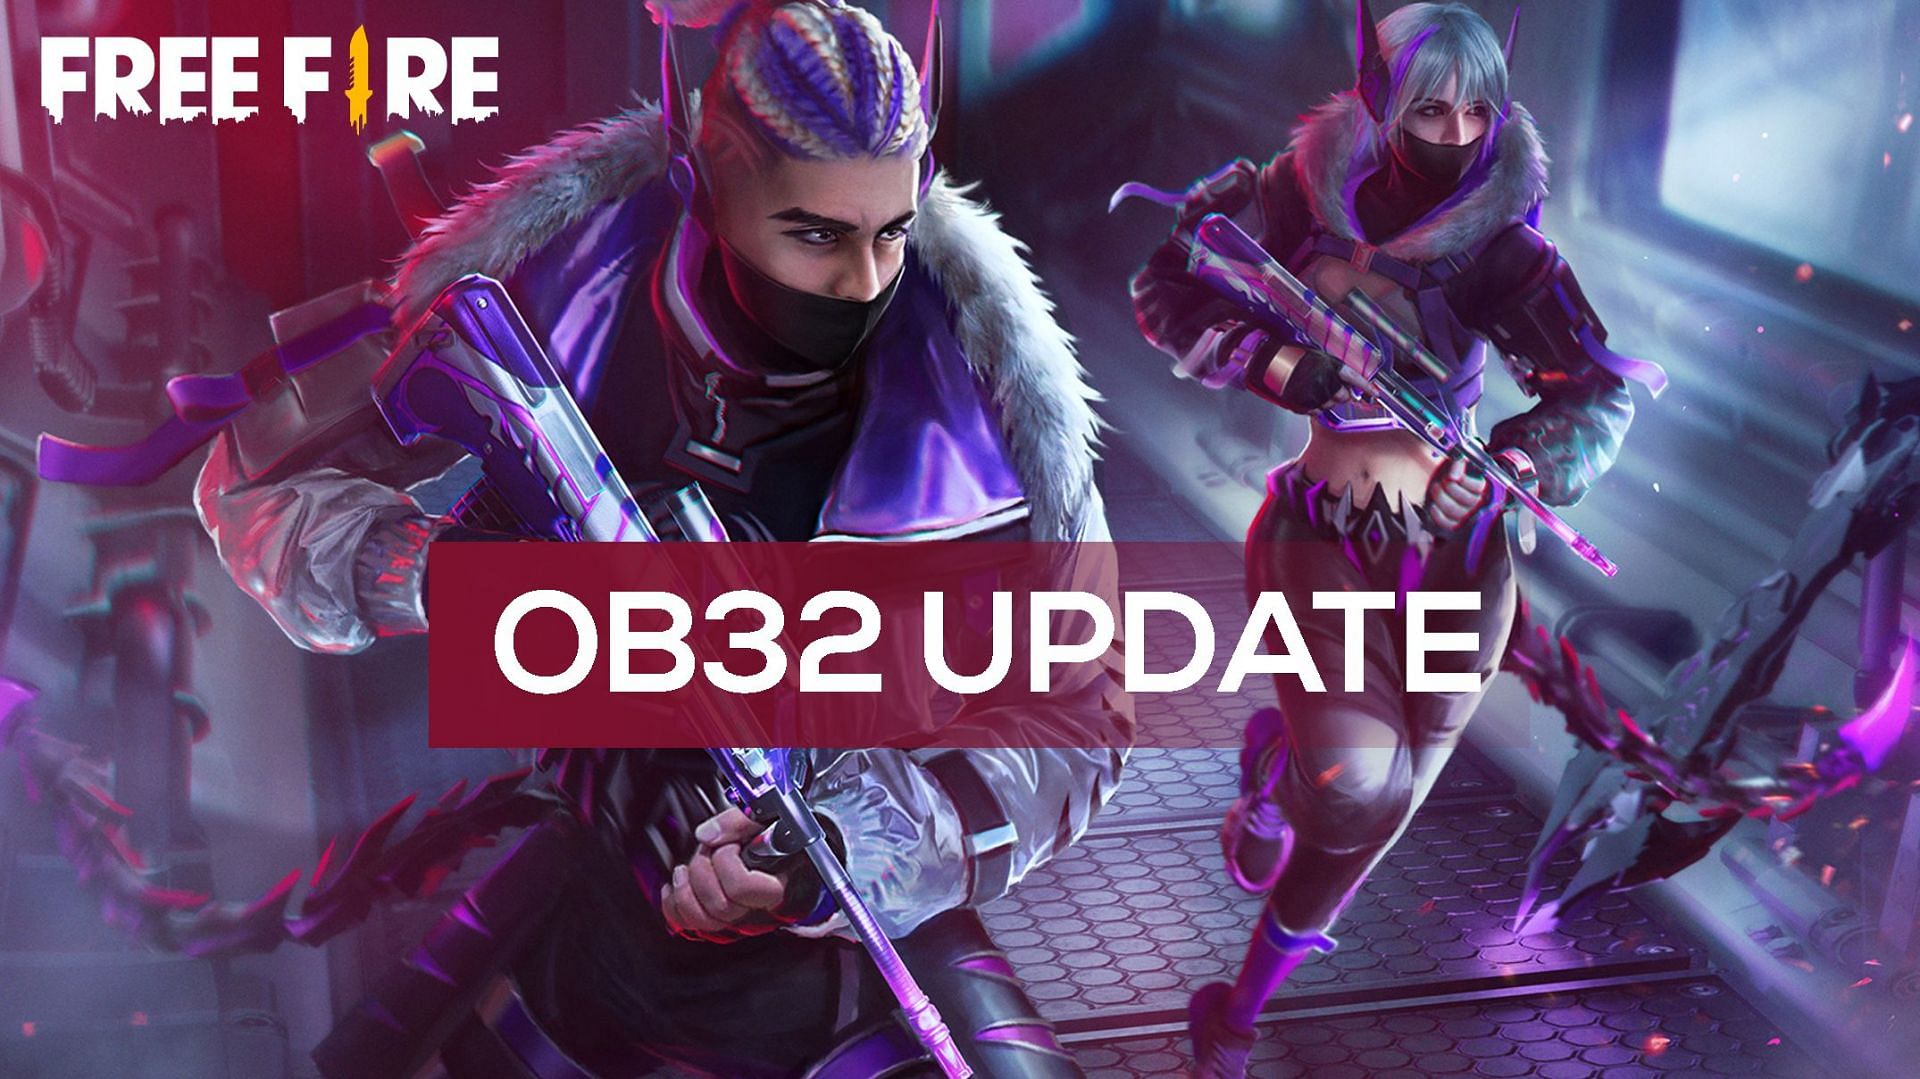 Next Garena Free Fire update (OB32): Expected release date, Advance Server  registration, download details and more